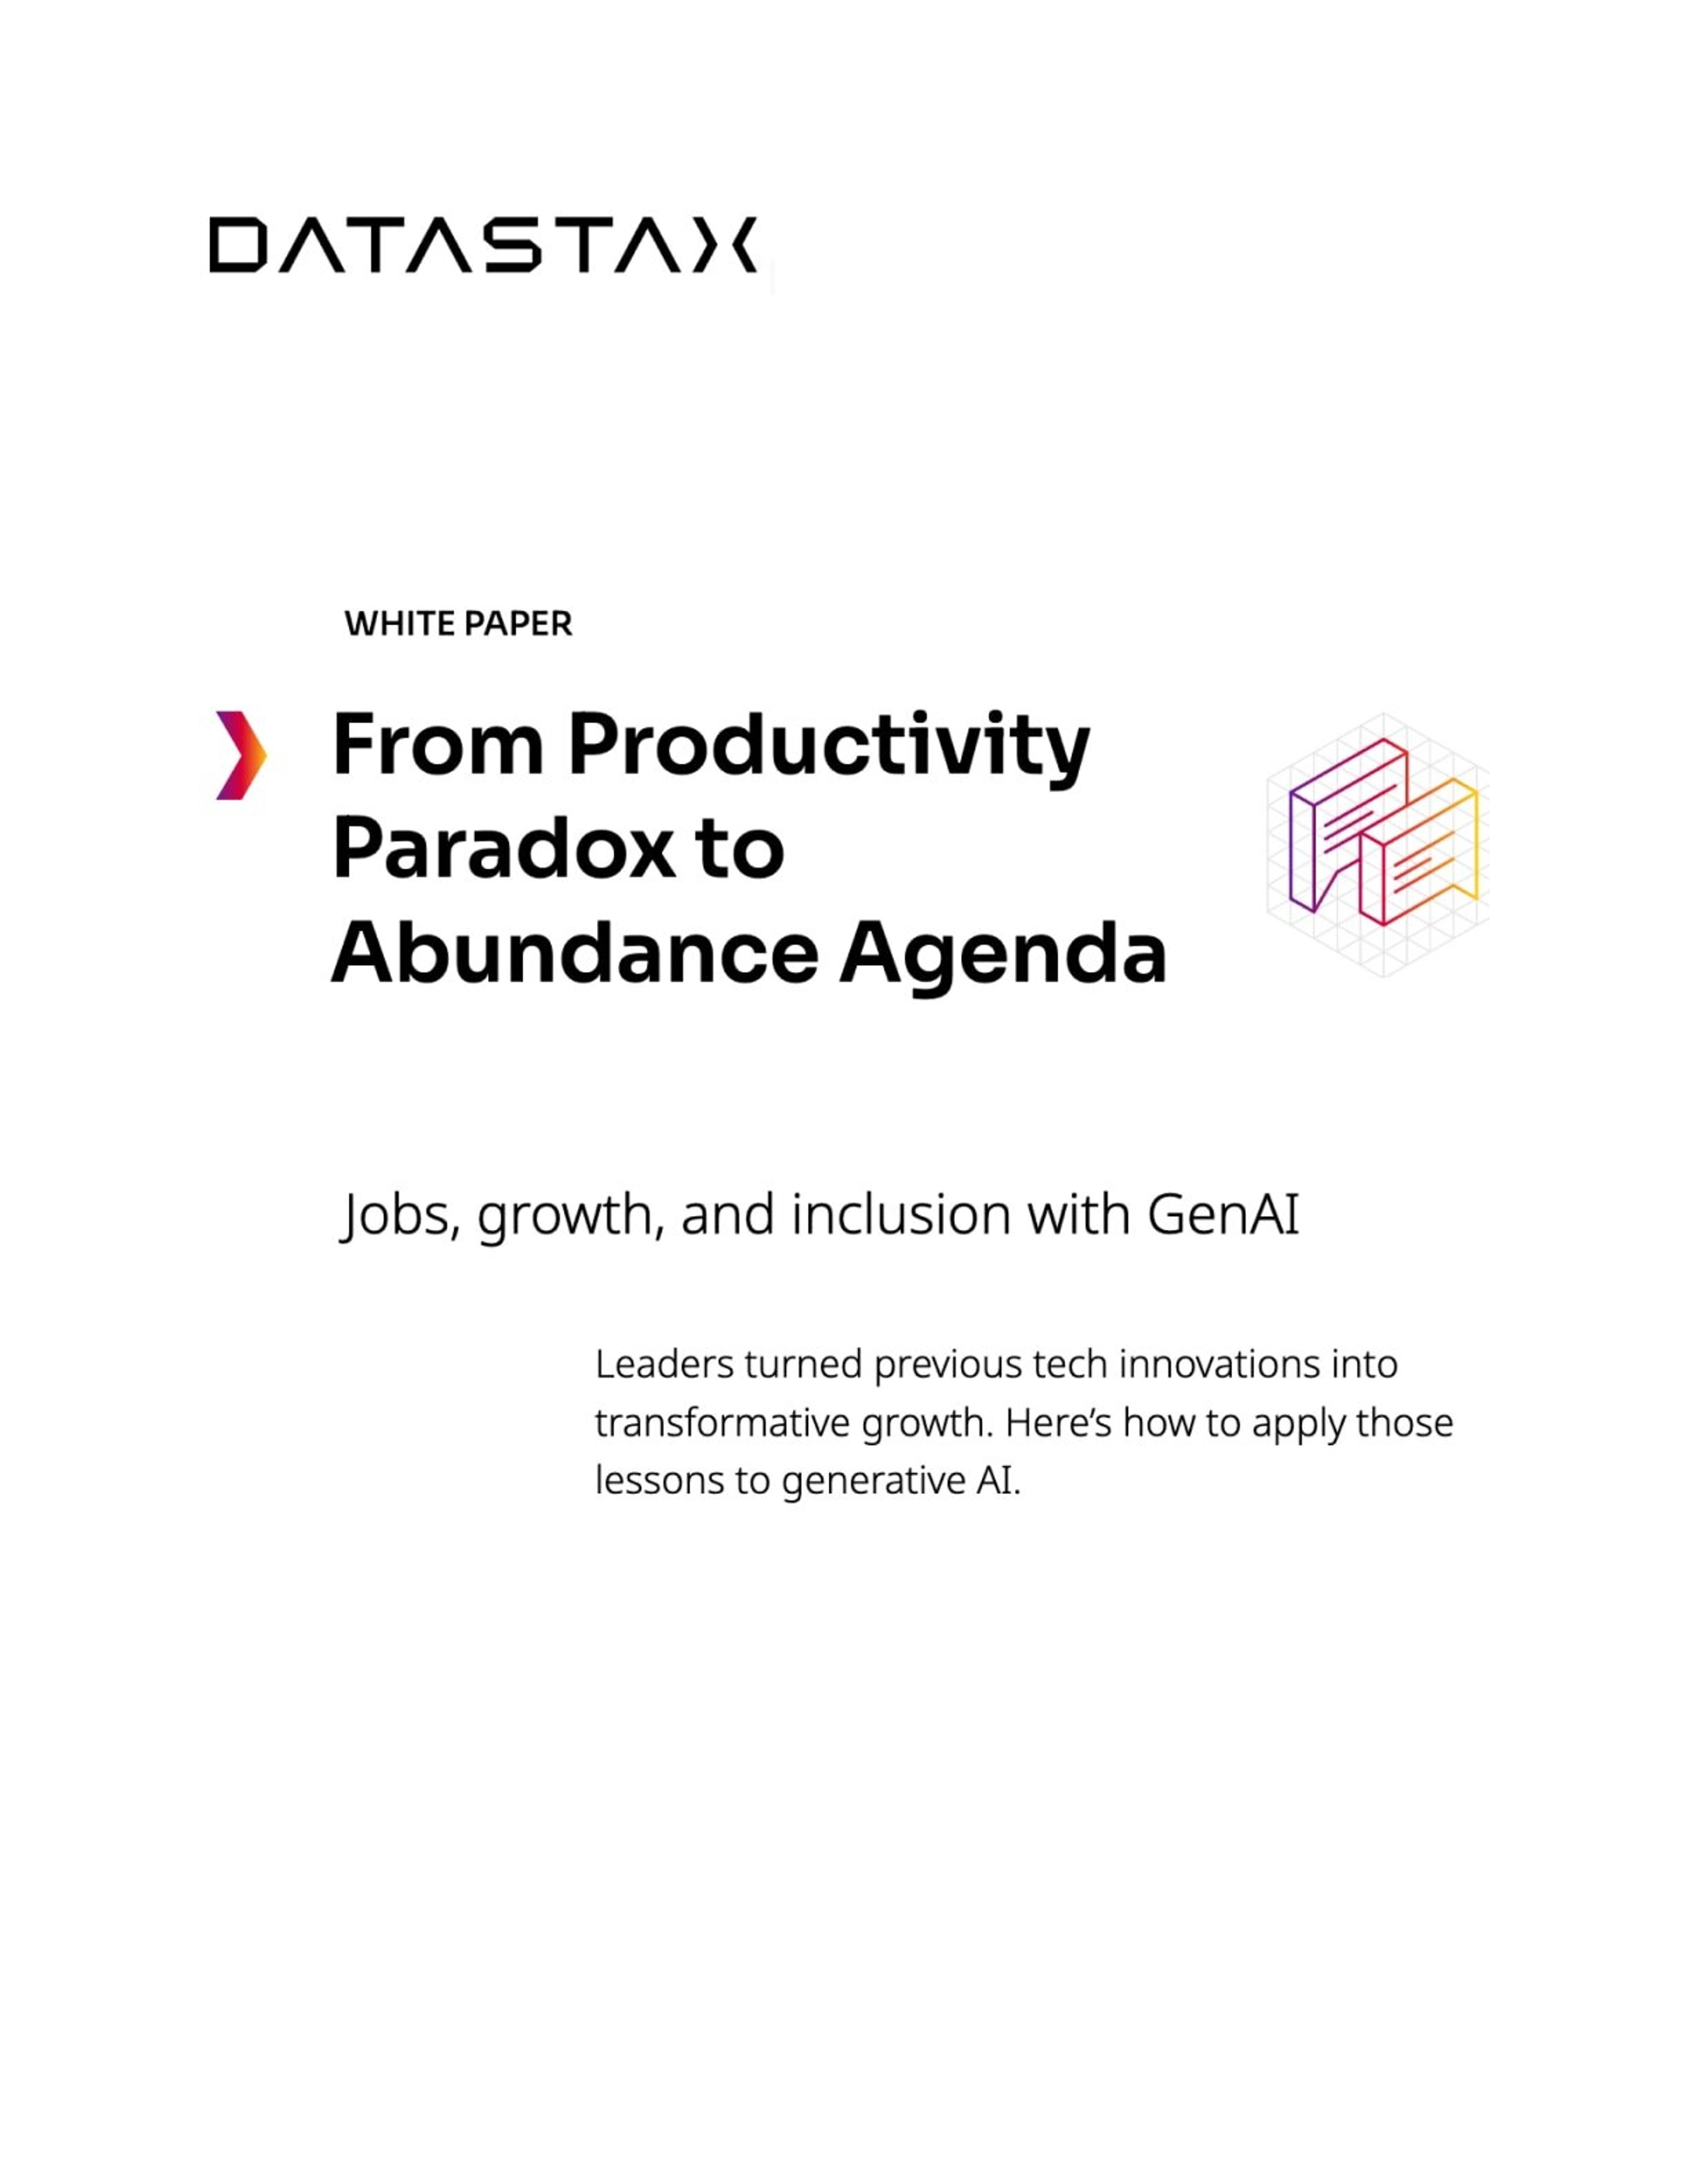 Jobs, Growth and Inclusion with Generative AI | DataStax